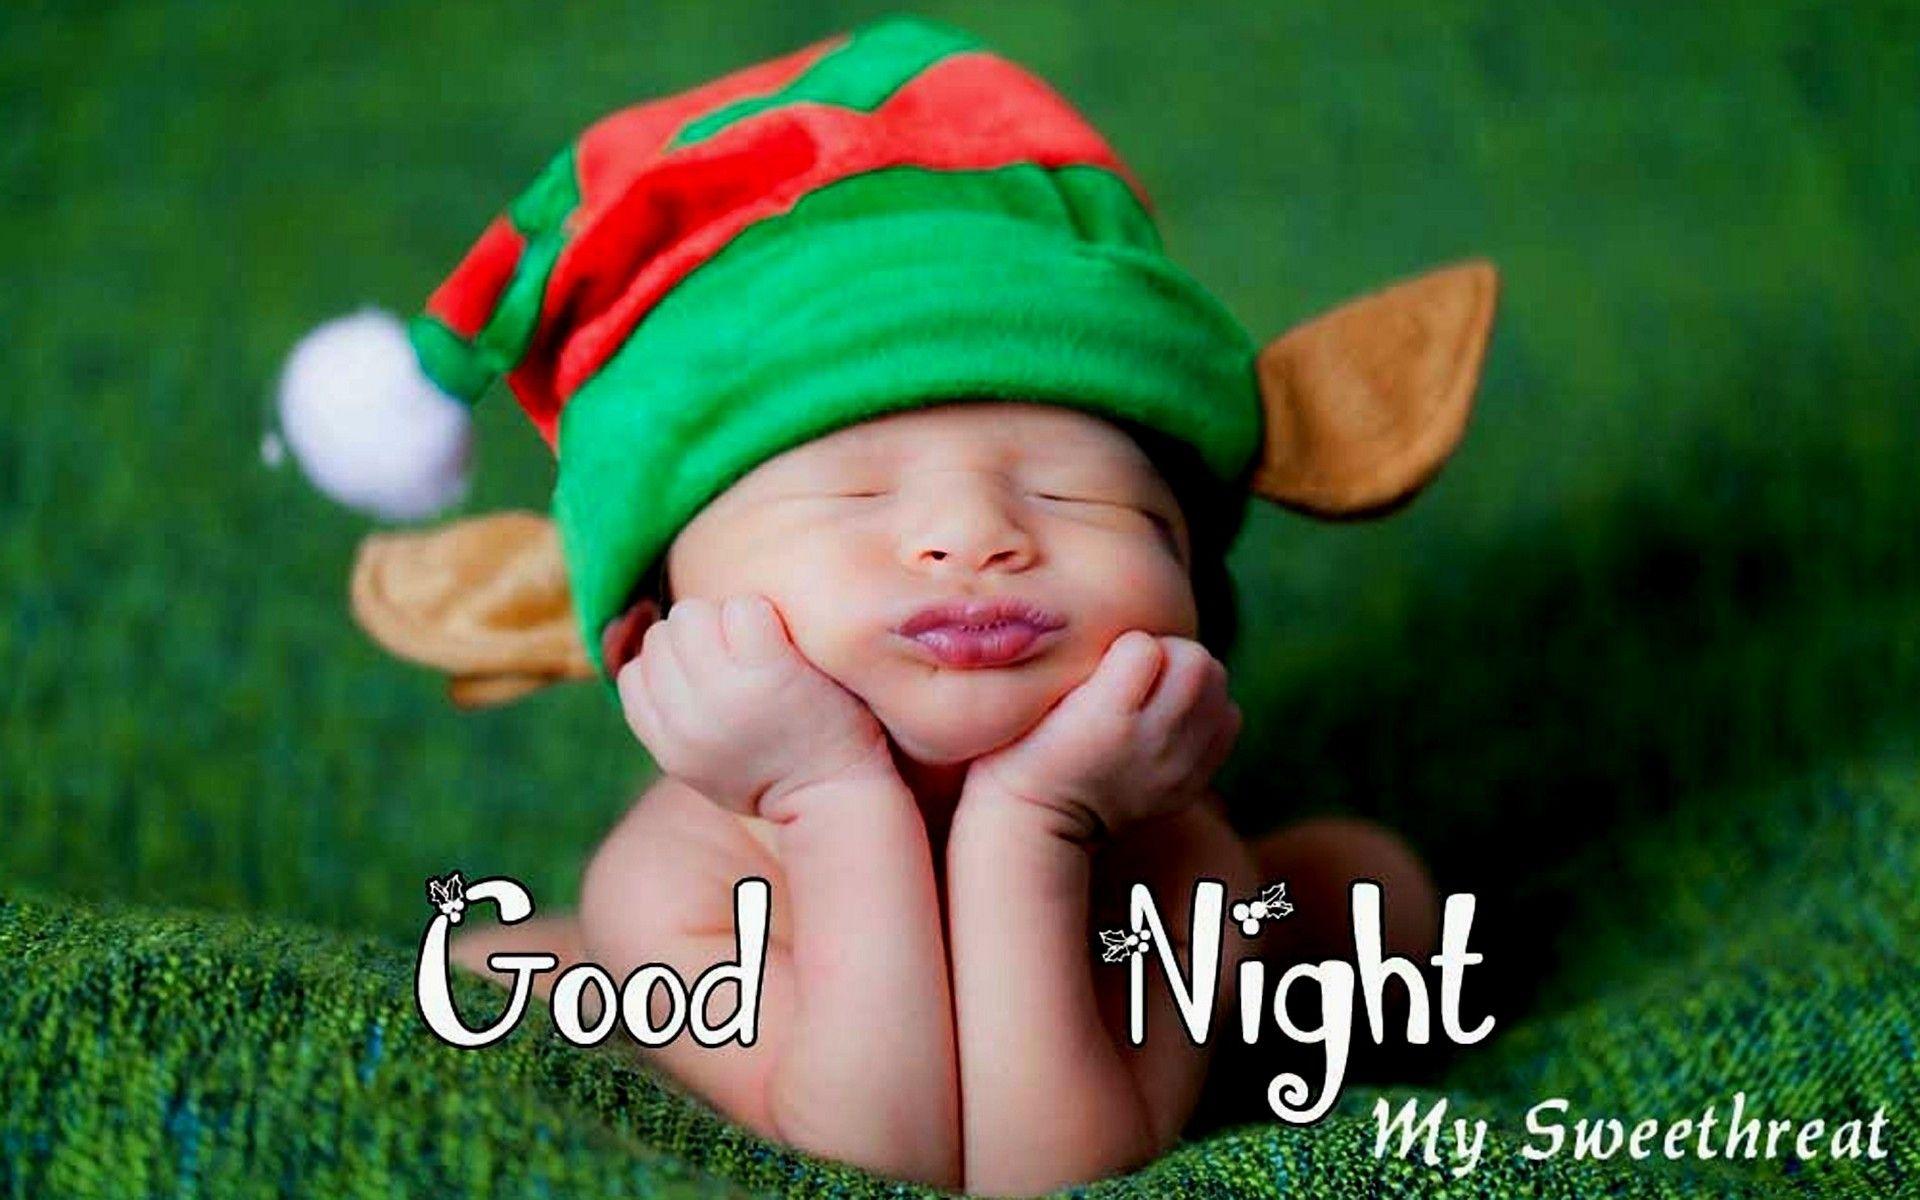 Wallpaper.wiki Cute Baby Good Night Background Download New PIC